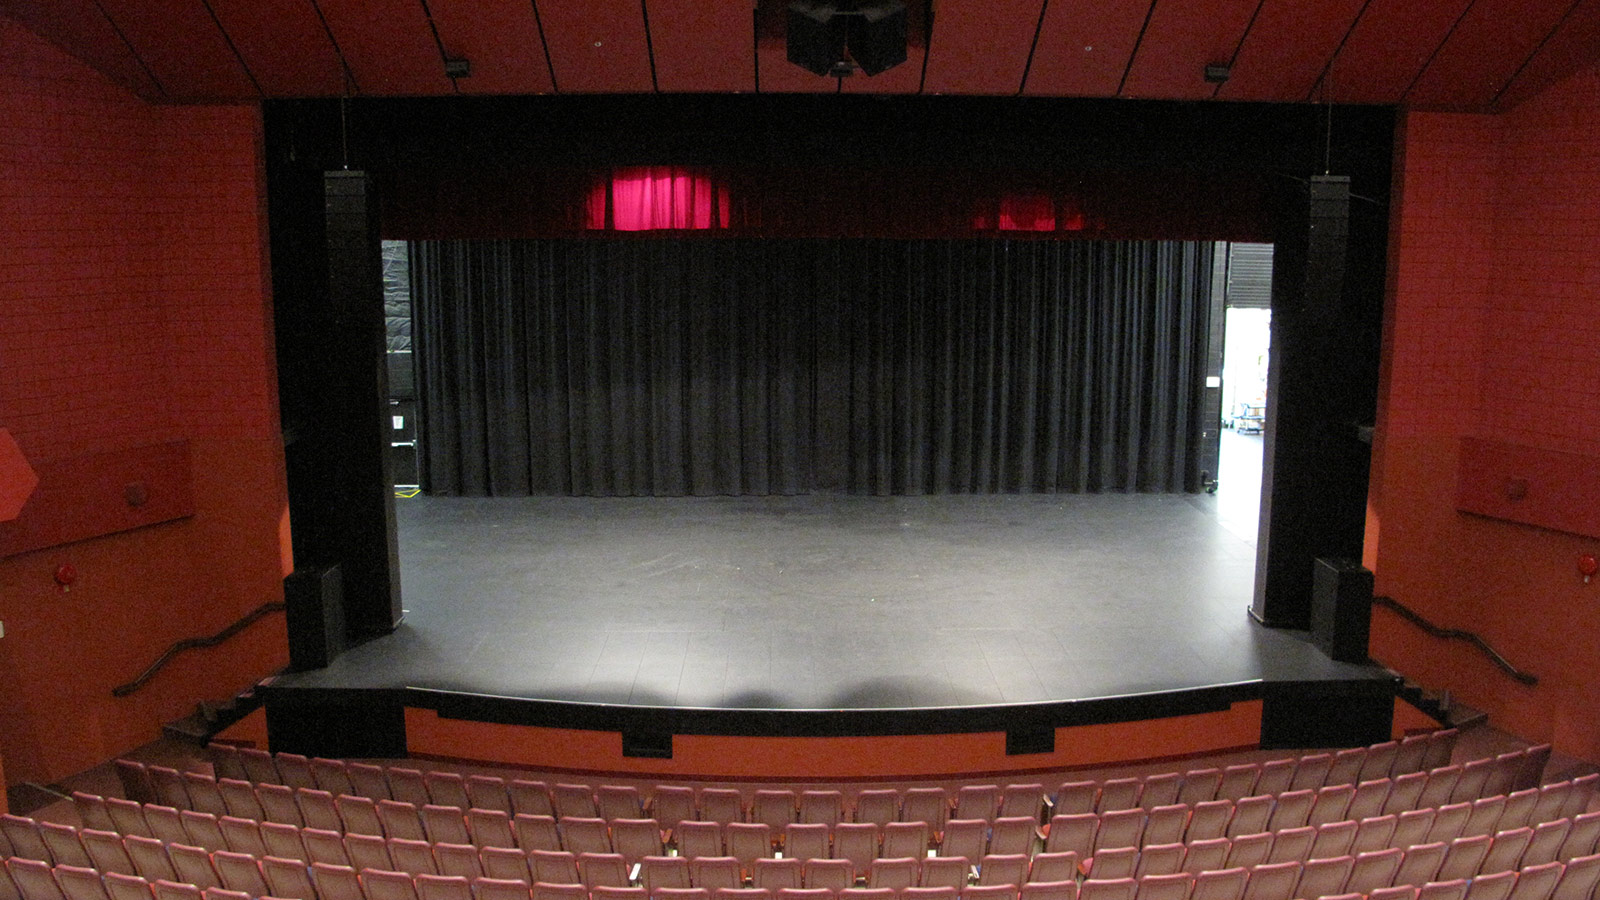 With Meyer Sound MINA, Every Seat is a Great Seat at Canada's Vernon and District Performing Arts Centre